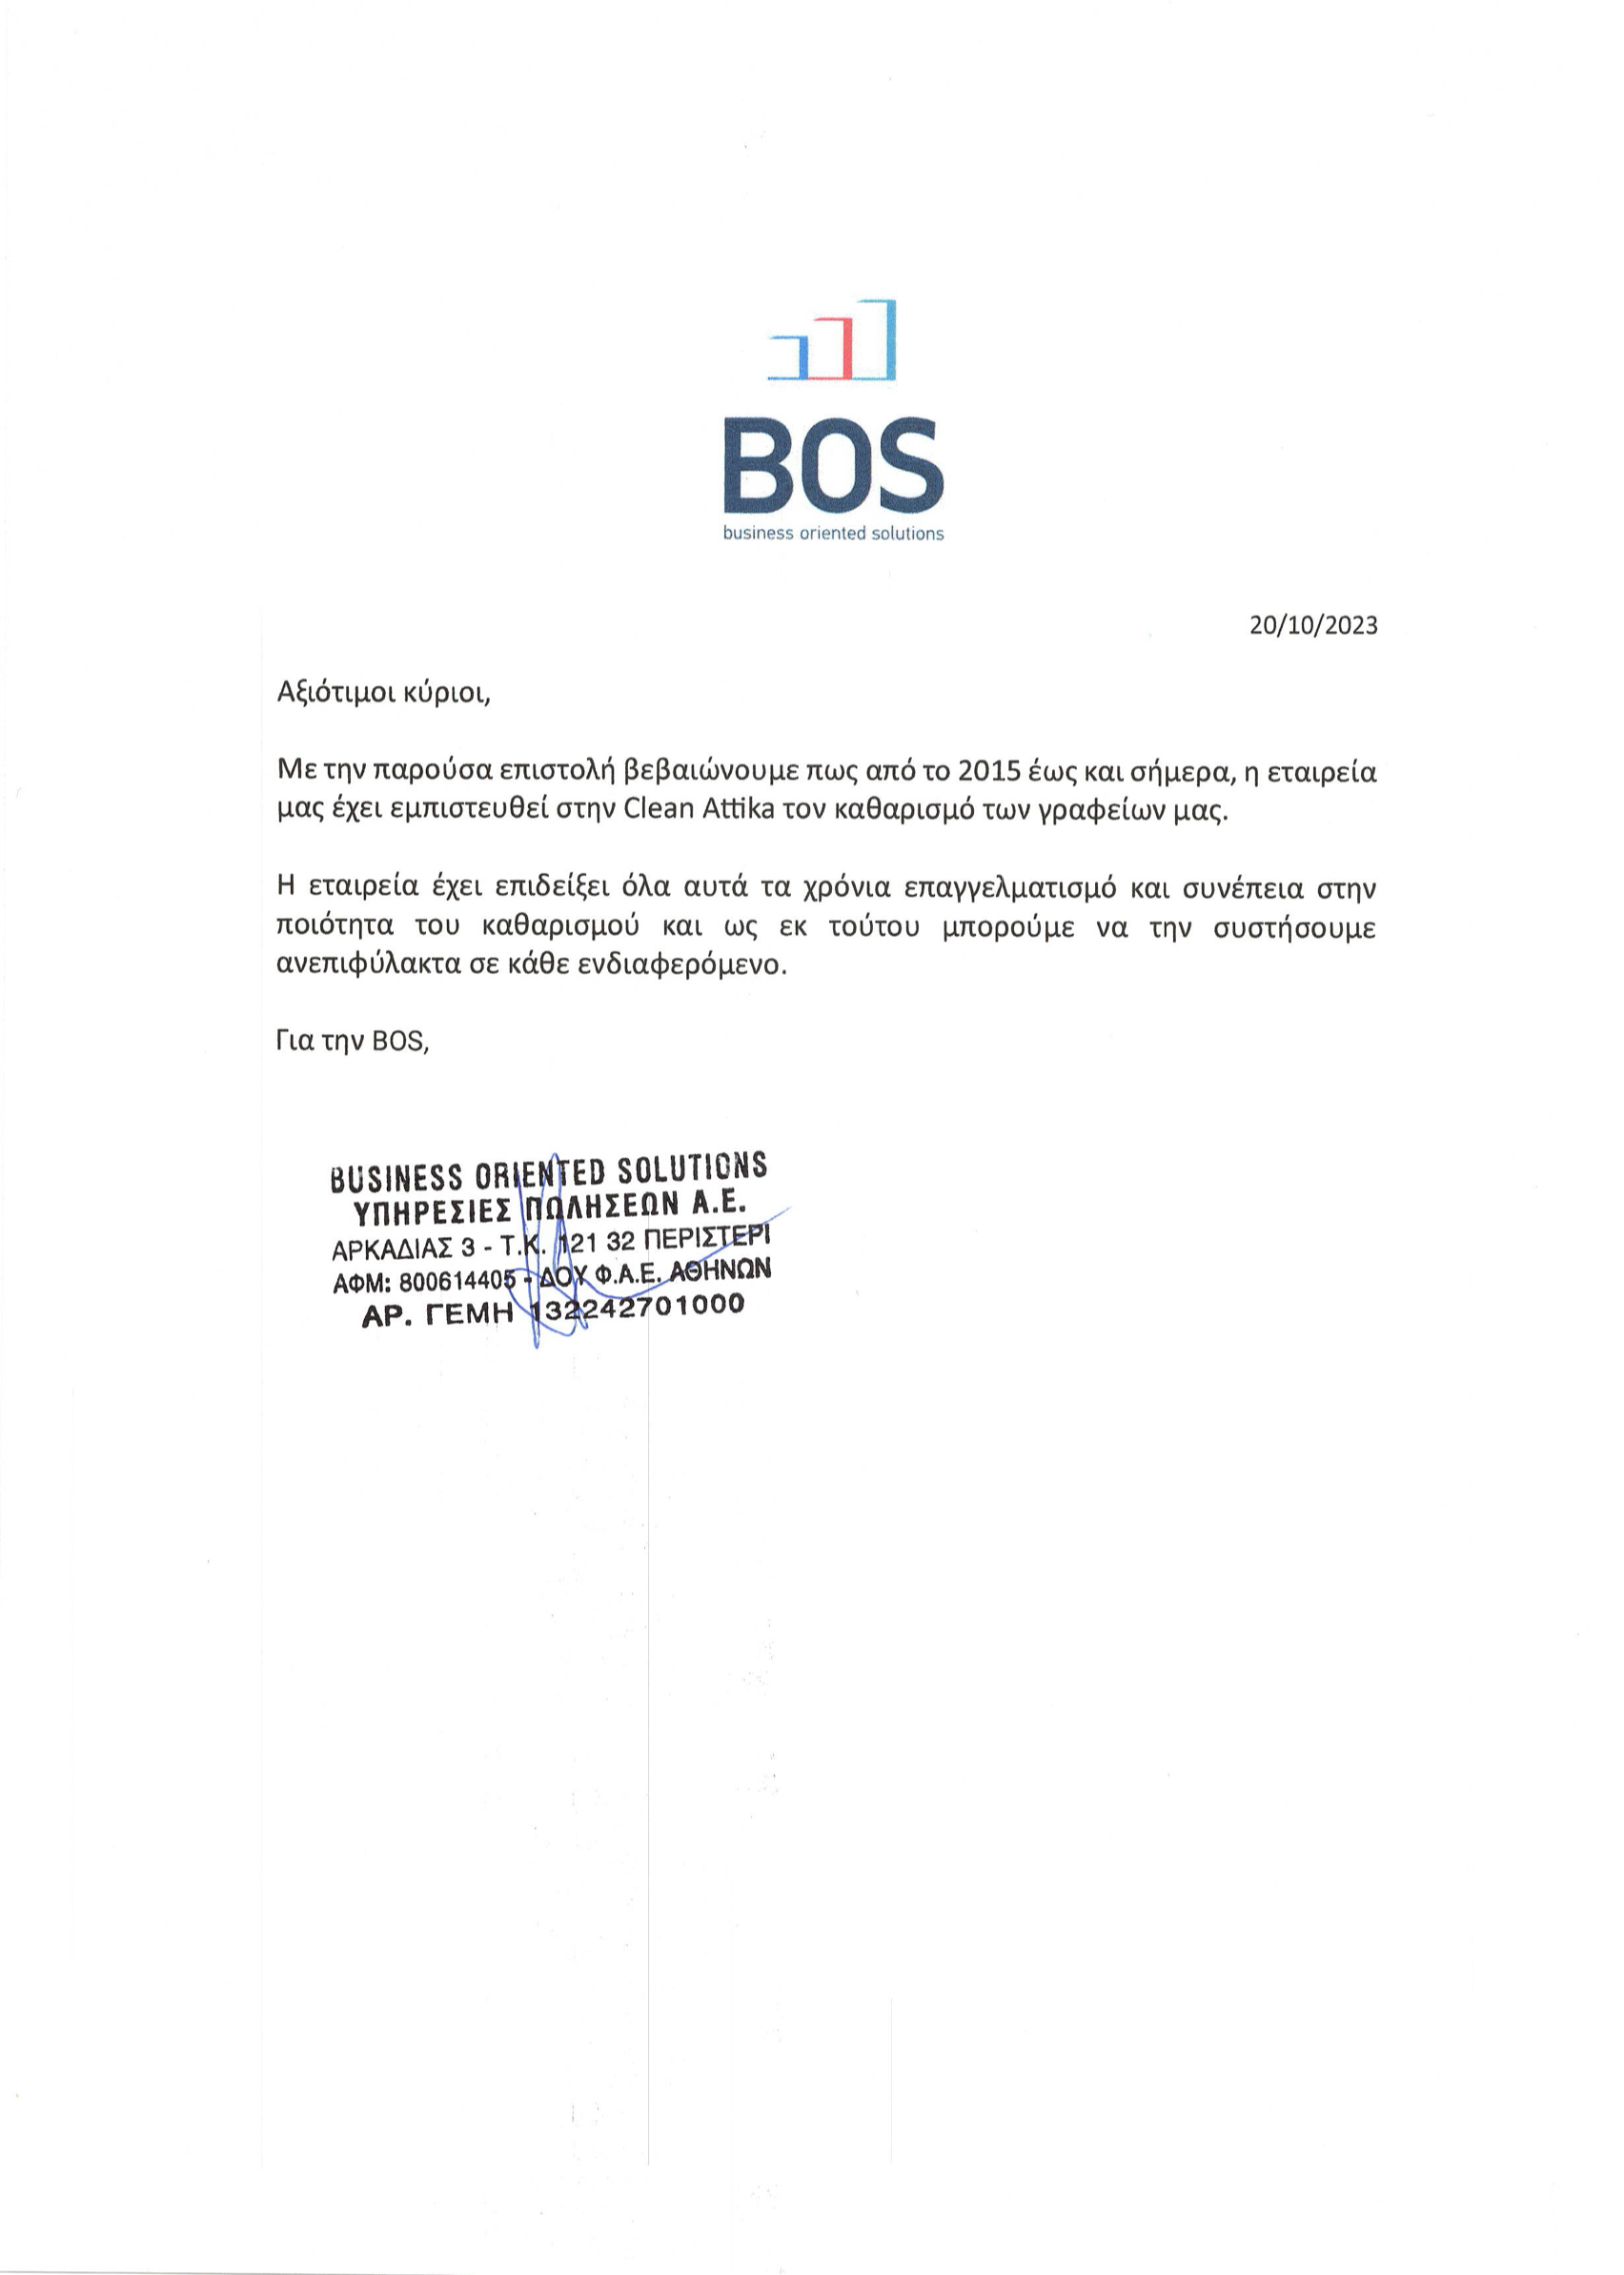 BOS recommendation letter